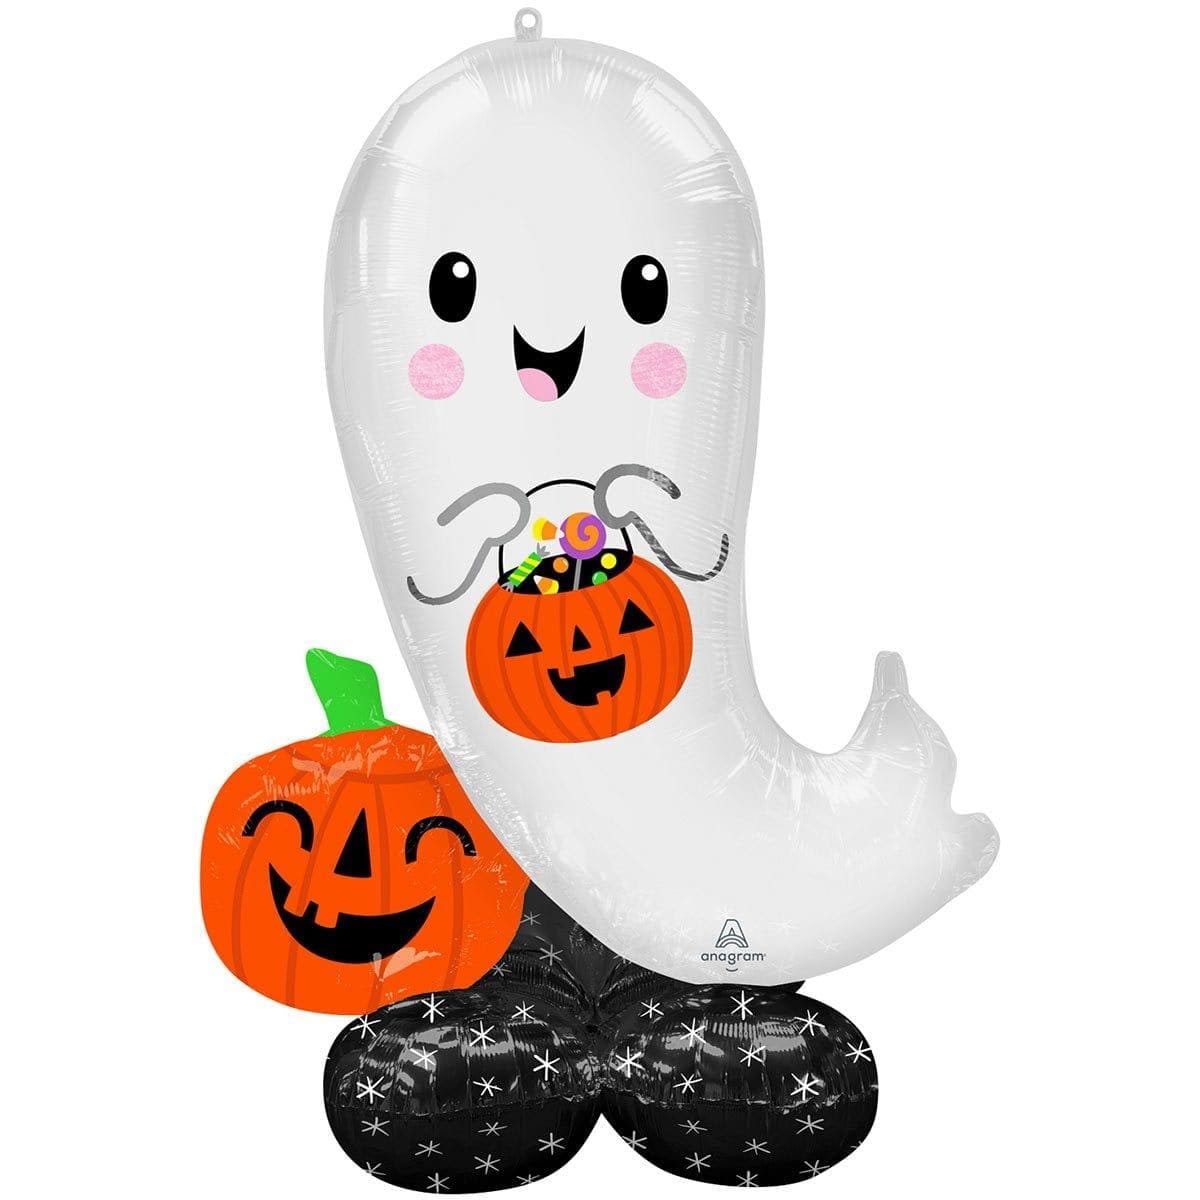 Buy Balloons Halloween Ghost Airloonz Standing Foil Air-Filled Balloon sold at Party Expert